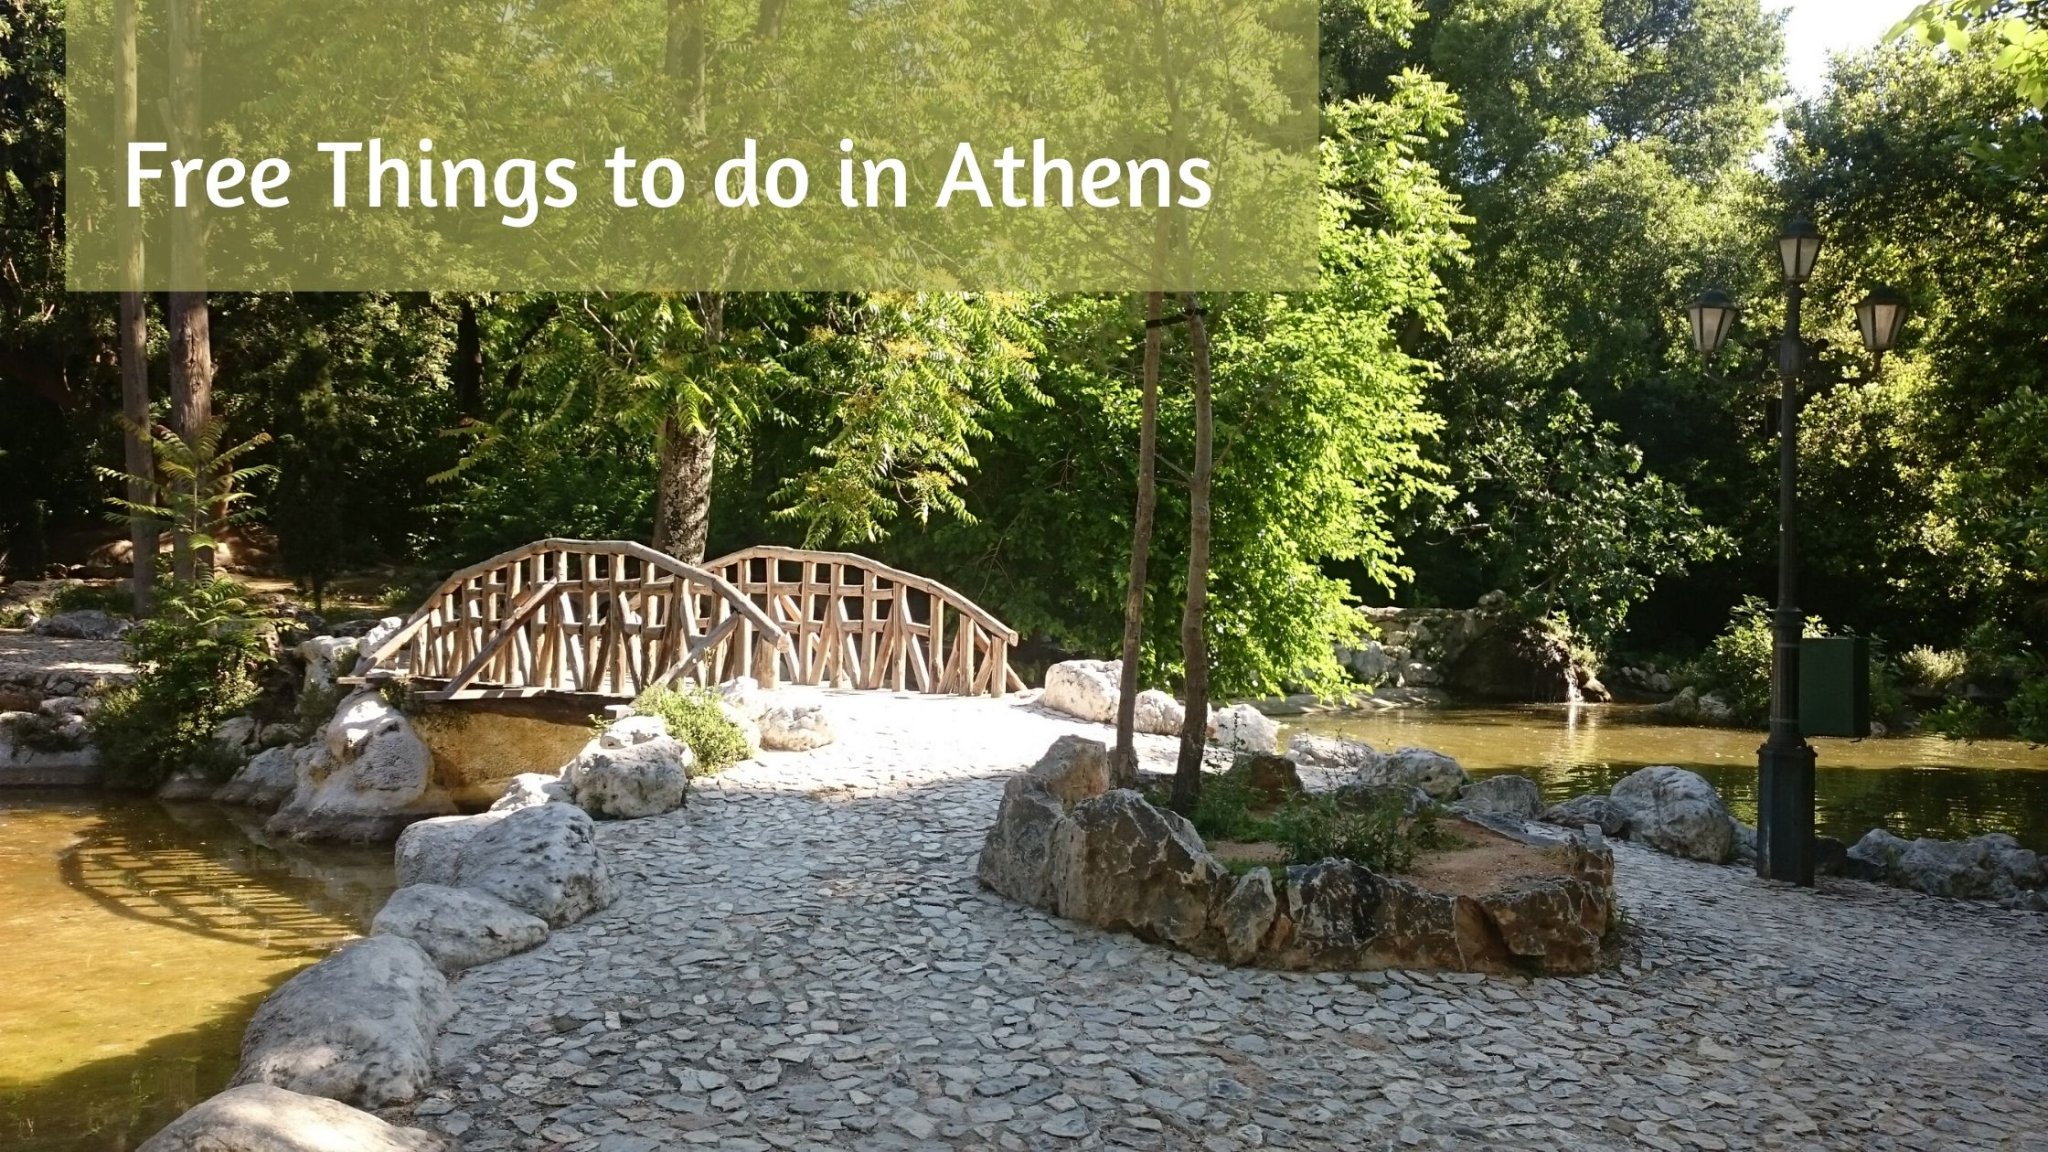 Free Things to do in Athens | LooknWalk Greece